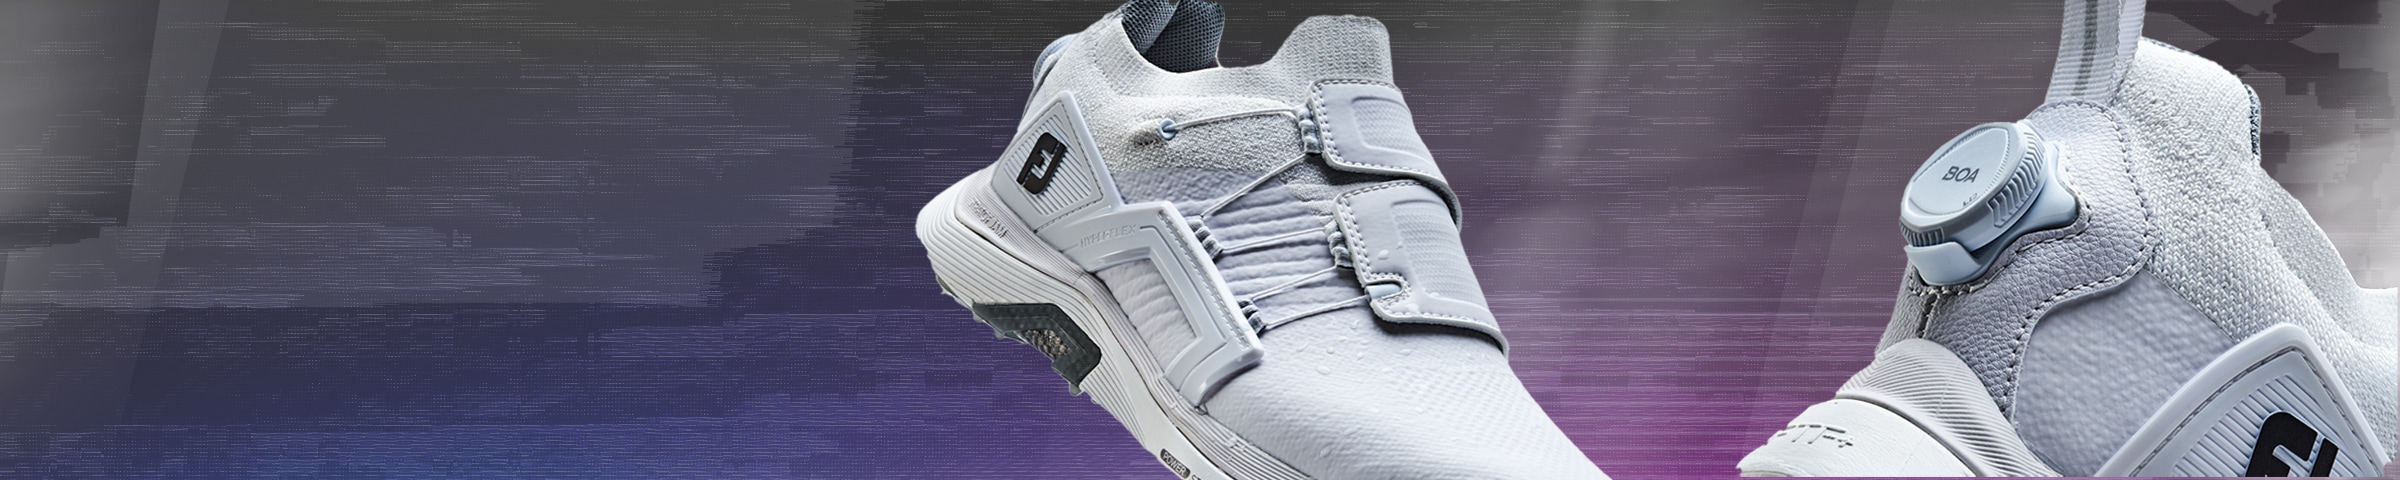 FootJoy BOA® Fit System Golf Shoes